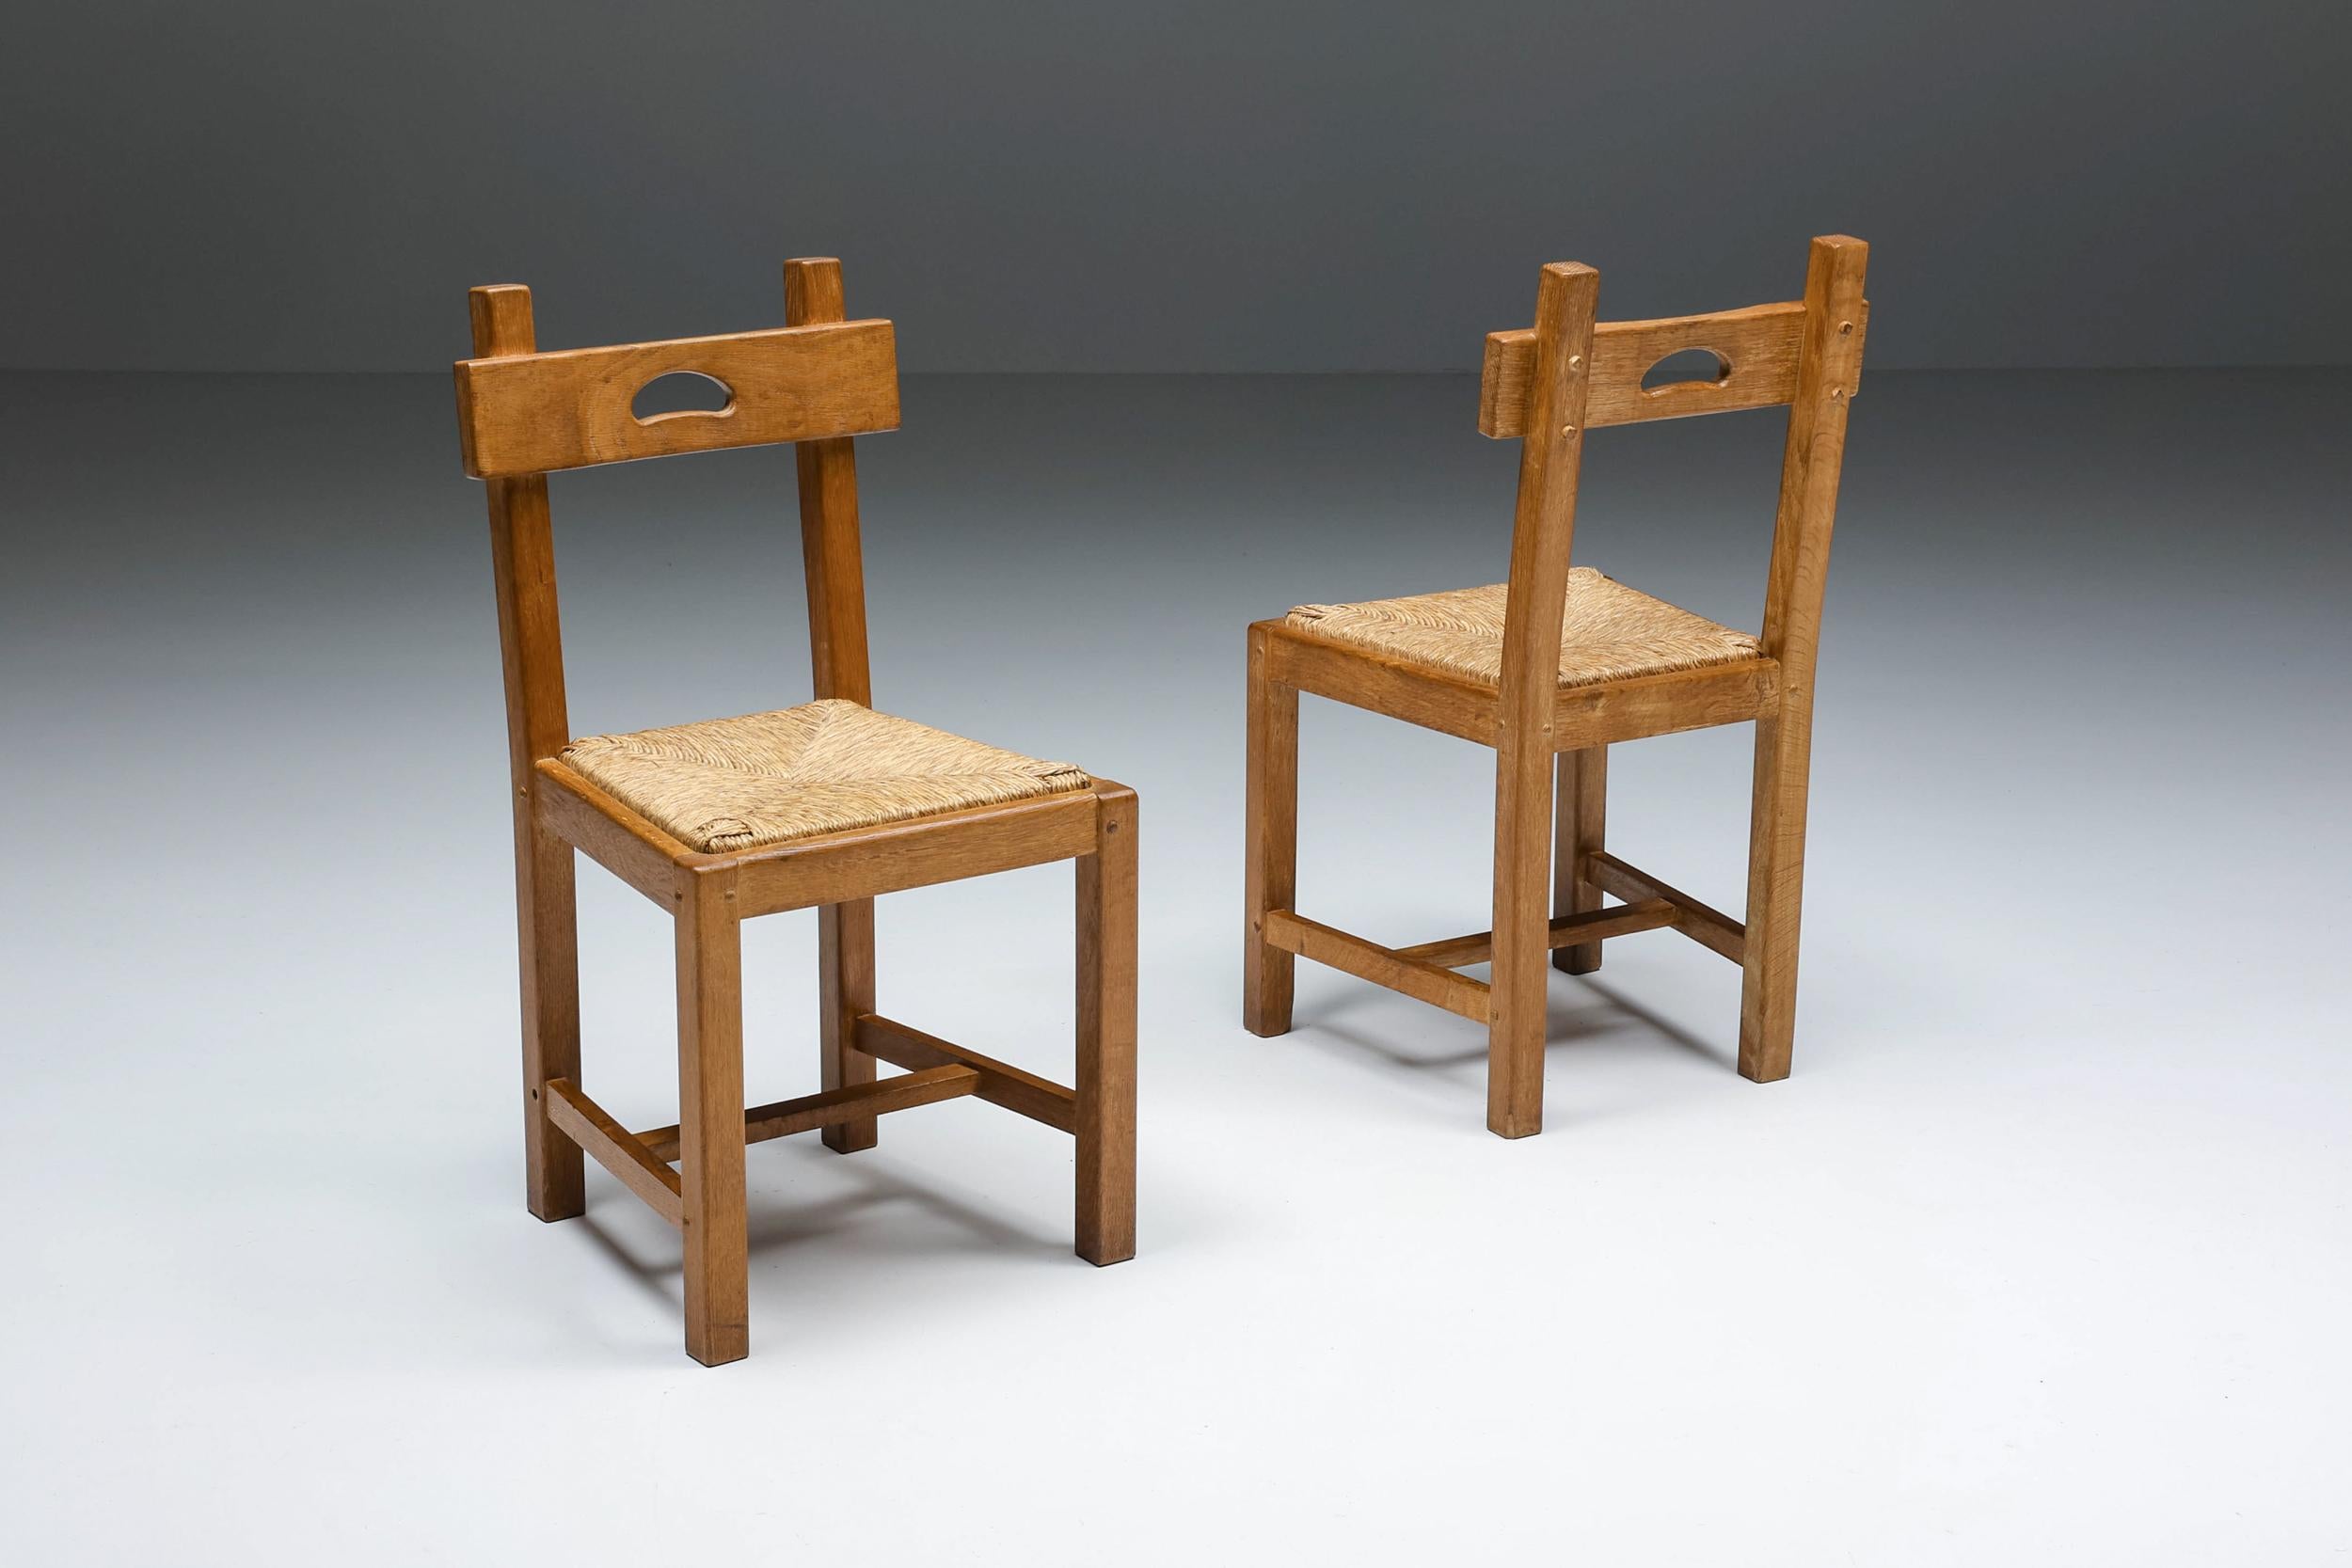 Rustic Spanish Wooden Dining Chairs, Arts & Crafts, Early 20th Century 1